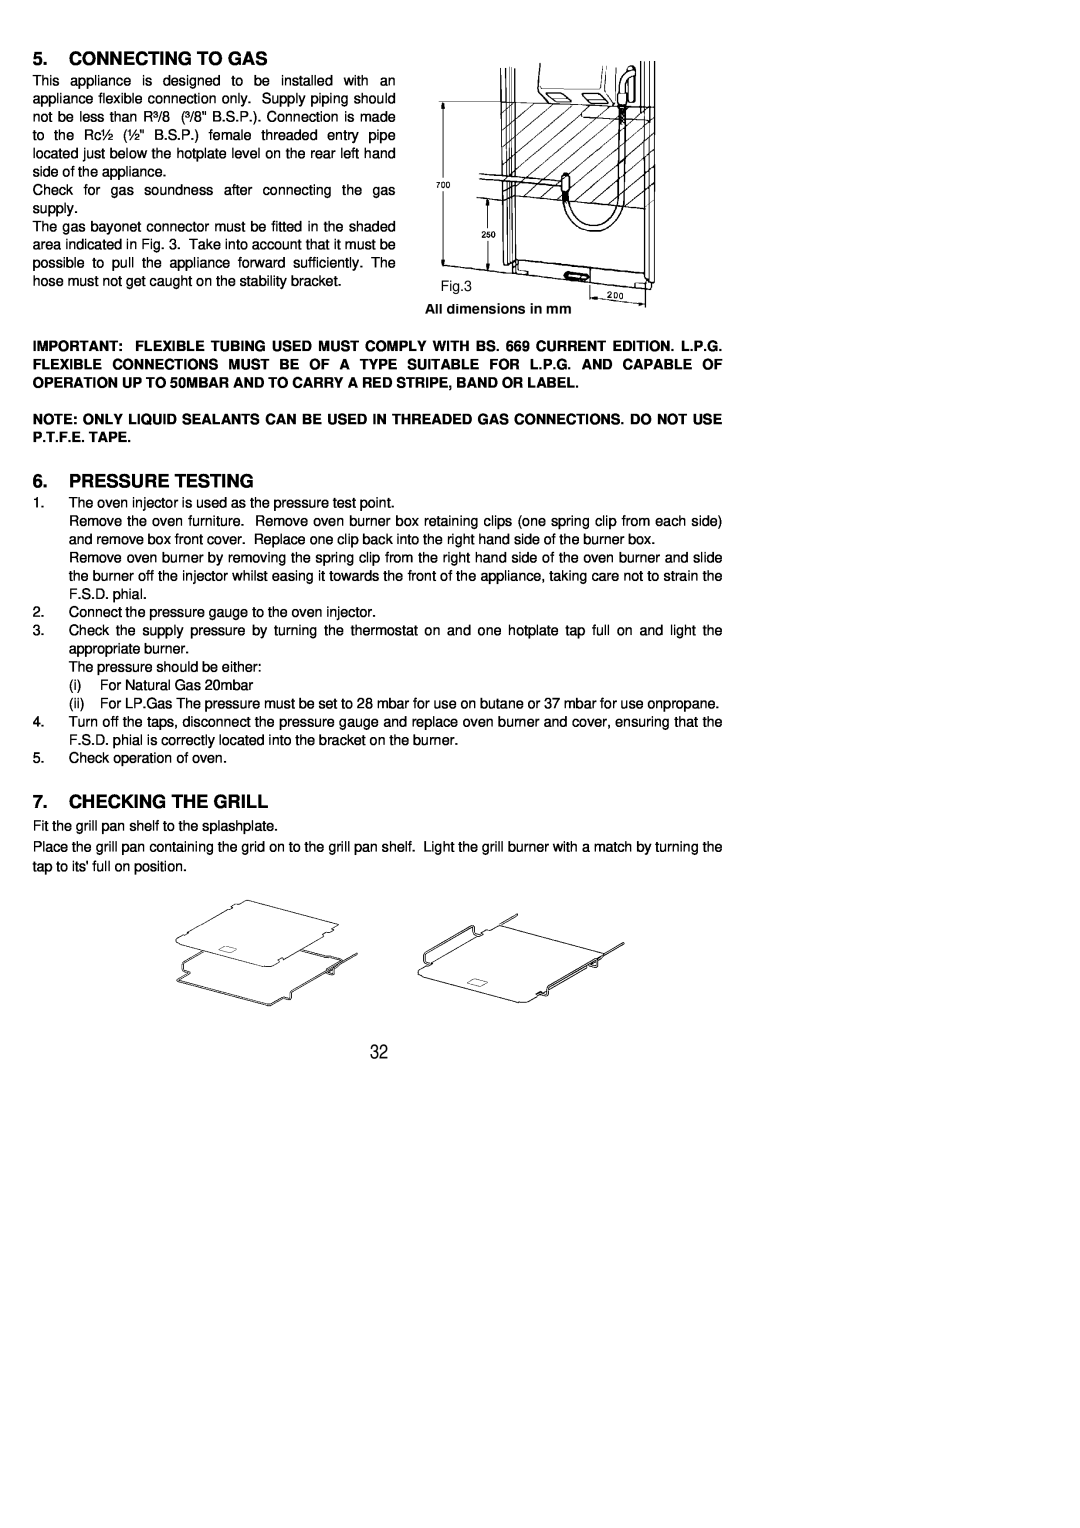 Parkinson Cowan Libra installation instructions Connecting To Gas, Pressure Testing, Checking The Grill 